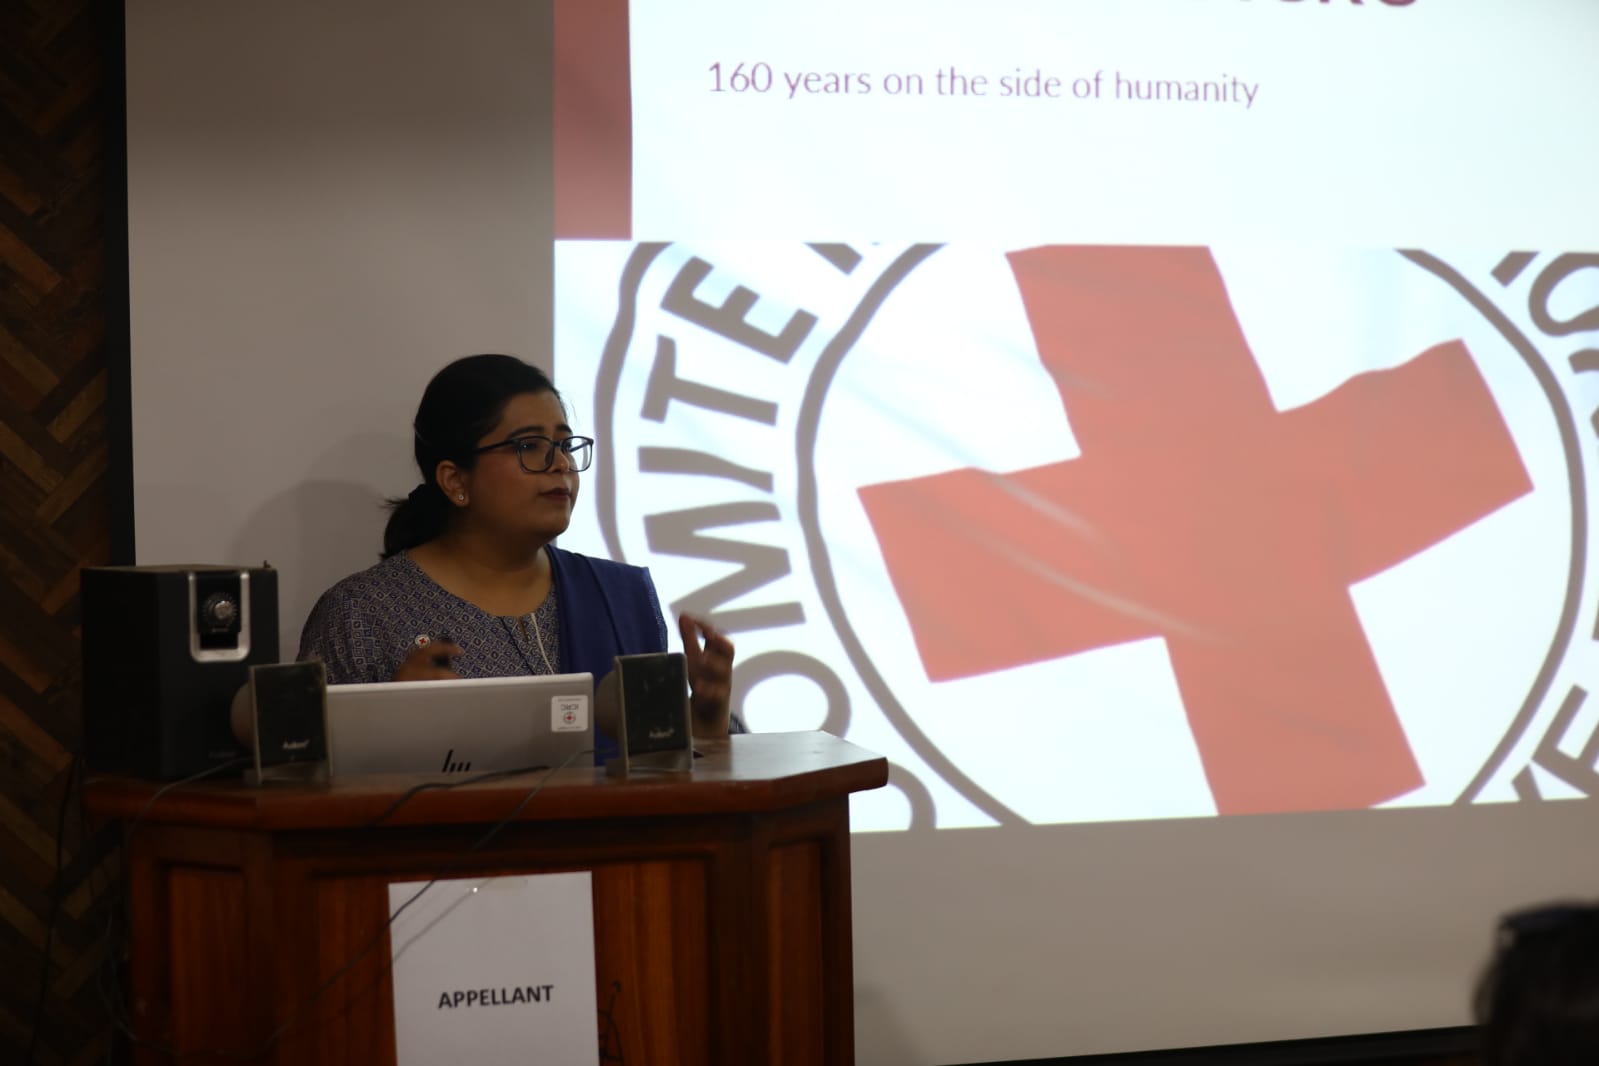 Two days Training Programme on International Humanitarian Law held by Intl’ Committee of Red Cross in collaboration with School of Law, Quaid-i-Azam University, Islamabad